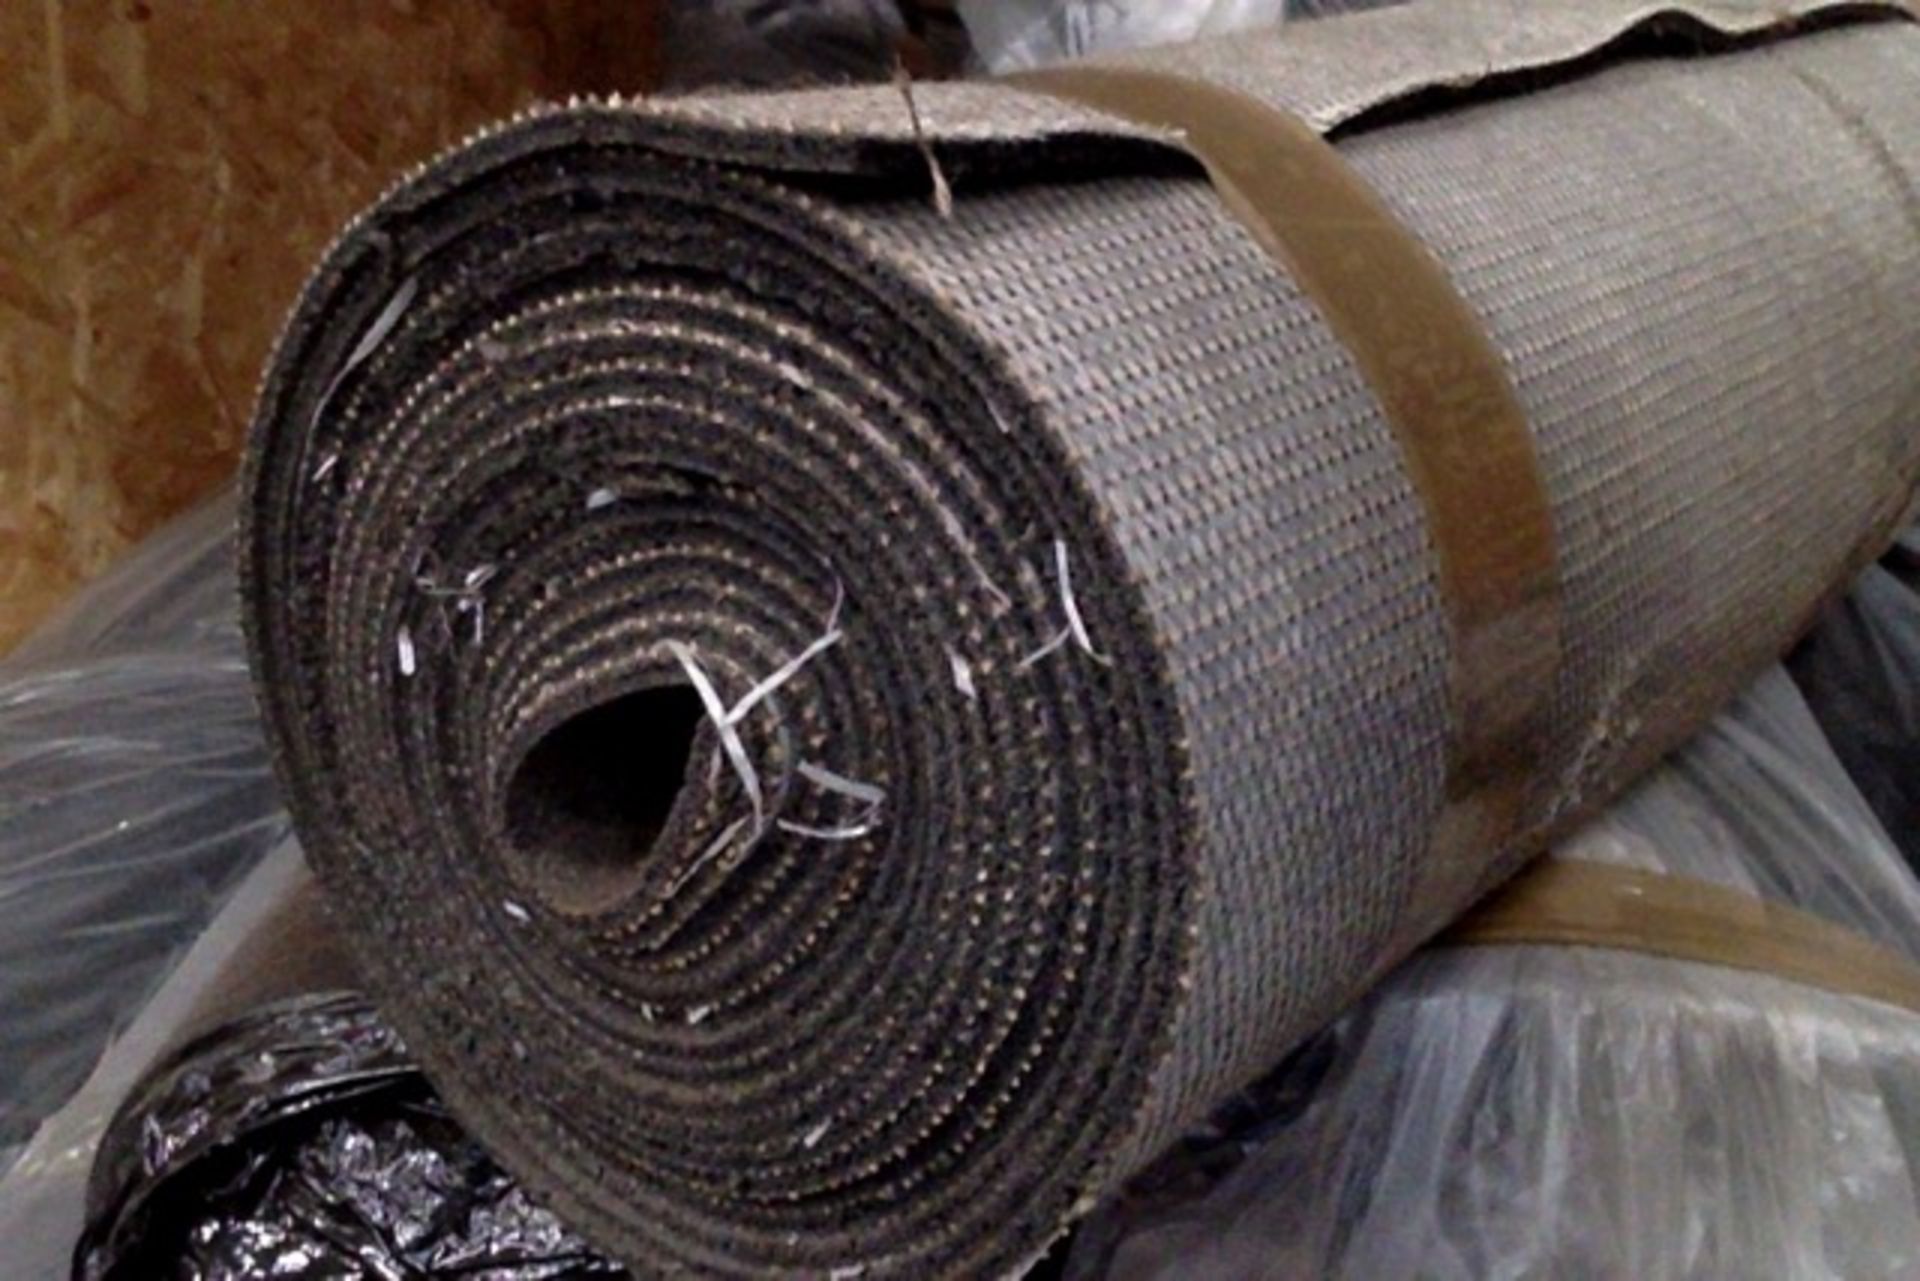 10 rolls of heavy duty Durafit 650 contract carpet underlay (RRP £185.00 per roll)